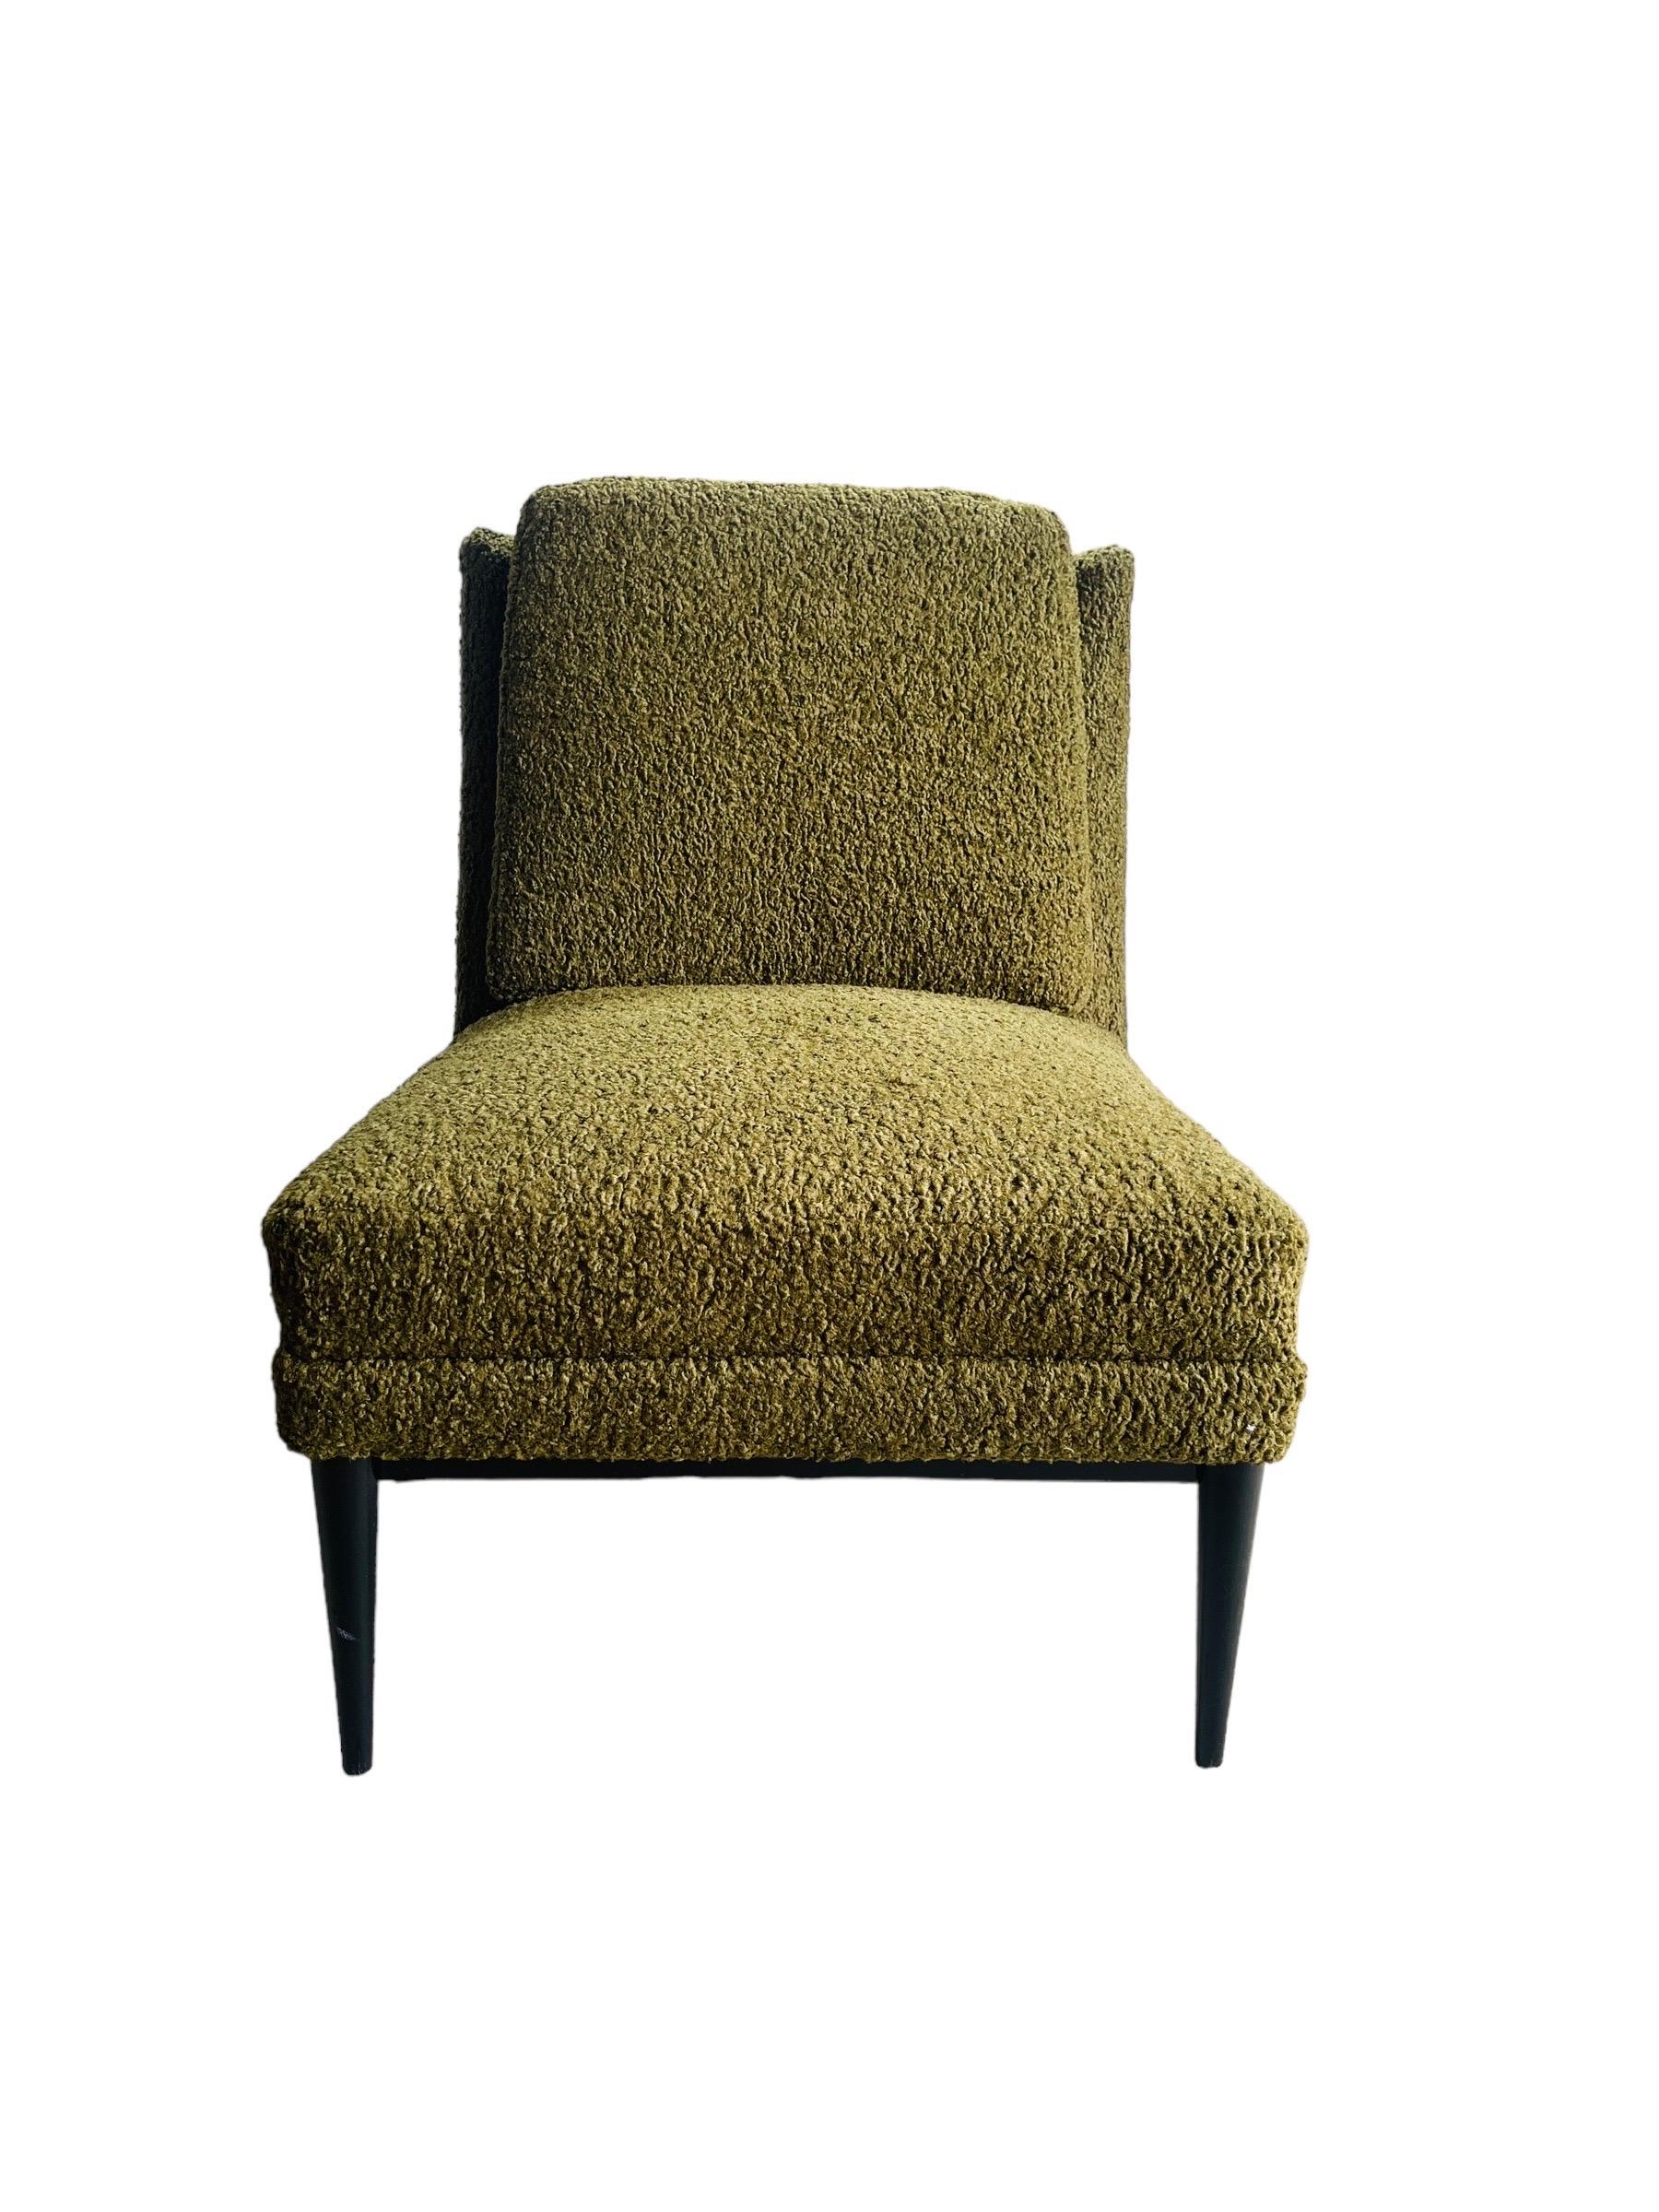 Dive into the sublime minimalism of the mid-century era with this exquisite slipper chair designed by the iconic Paul McCobb. Beautifully restored and reupholstered in a lush olive green bouclé fabric, this chair blends comfort with a clean, sleek